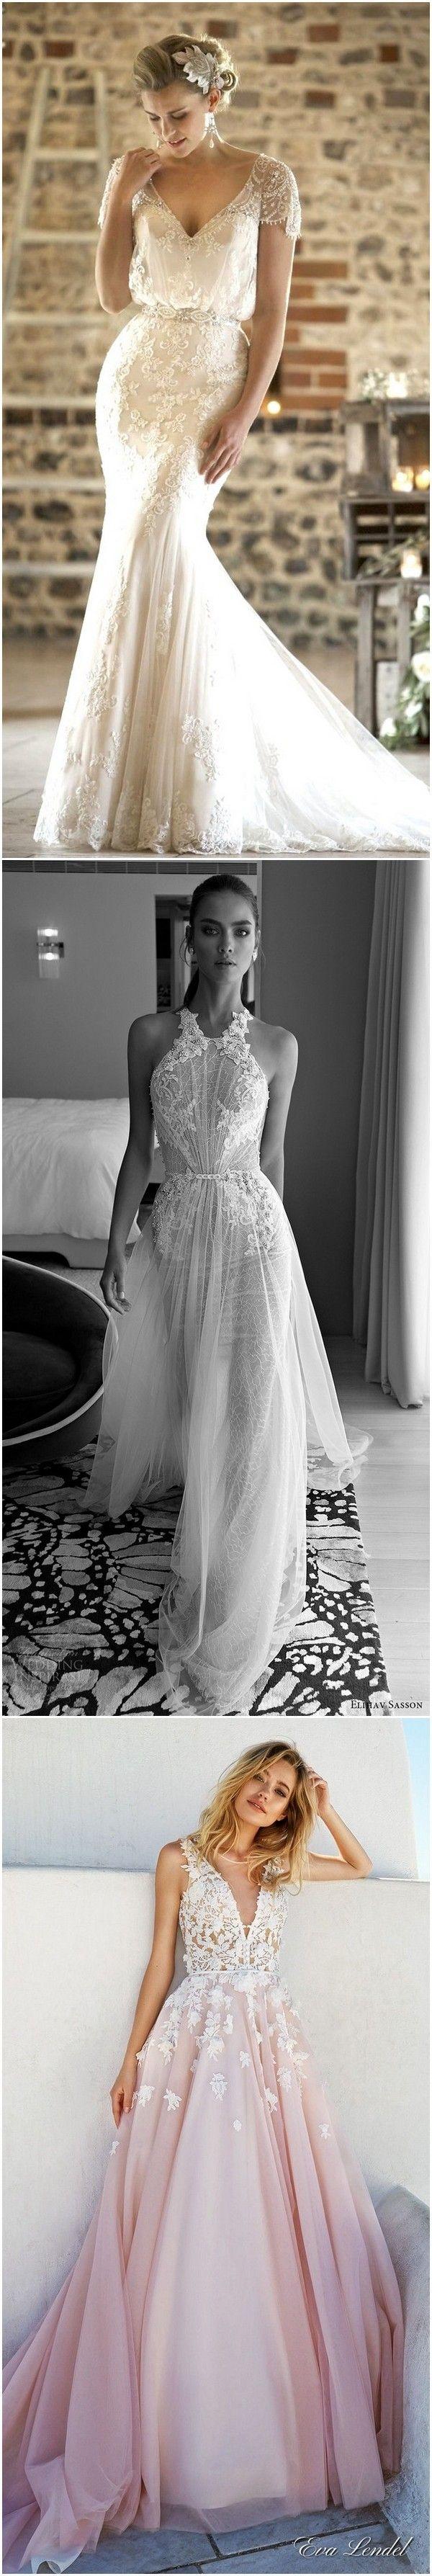 Hochzeit - Top 20 Vintage Wedding Dresses For 2017 Trends - Page 2 Of 4